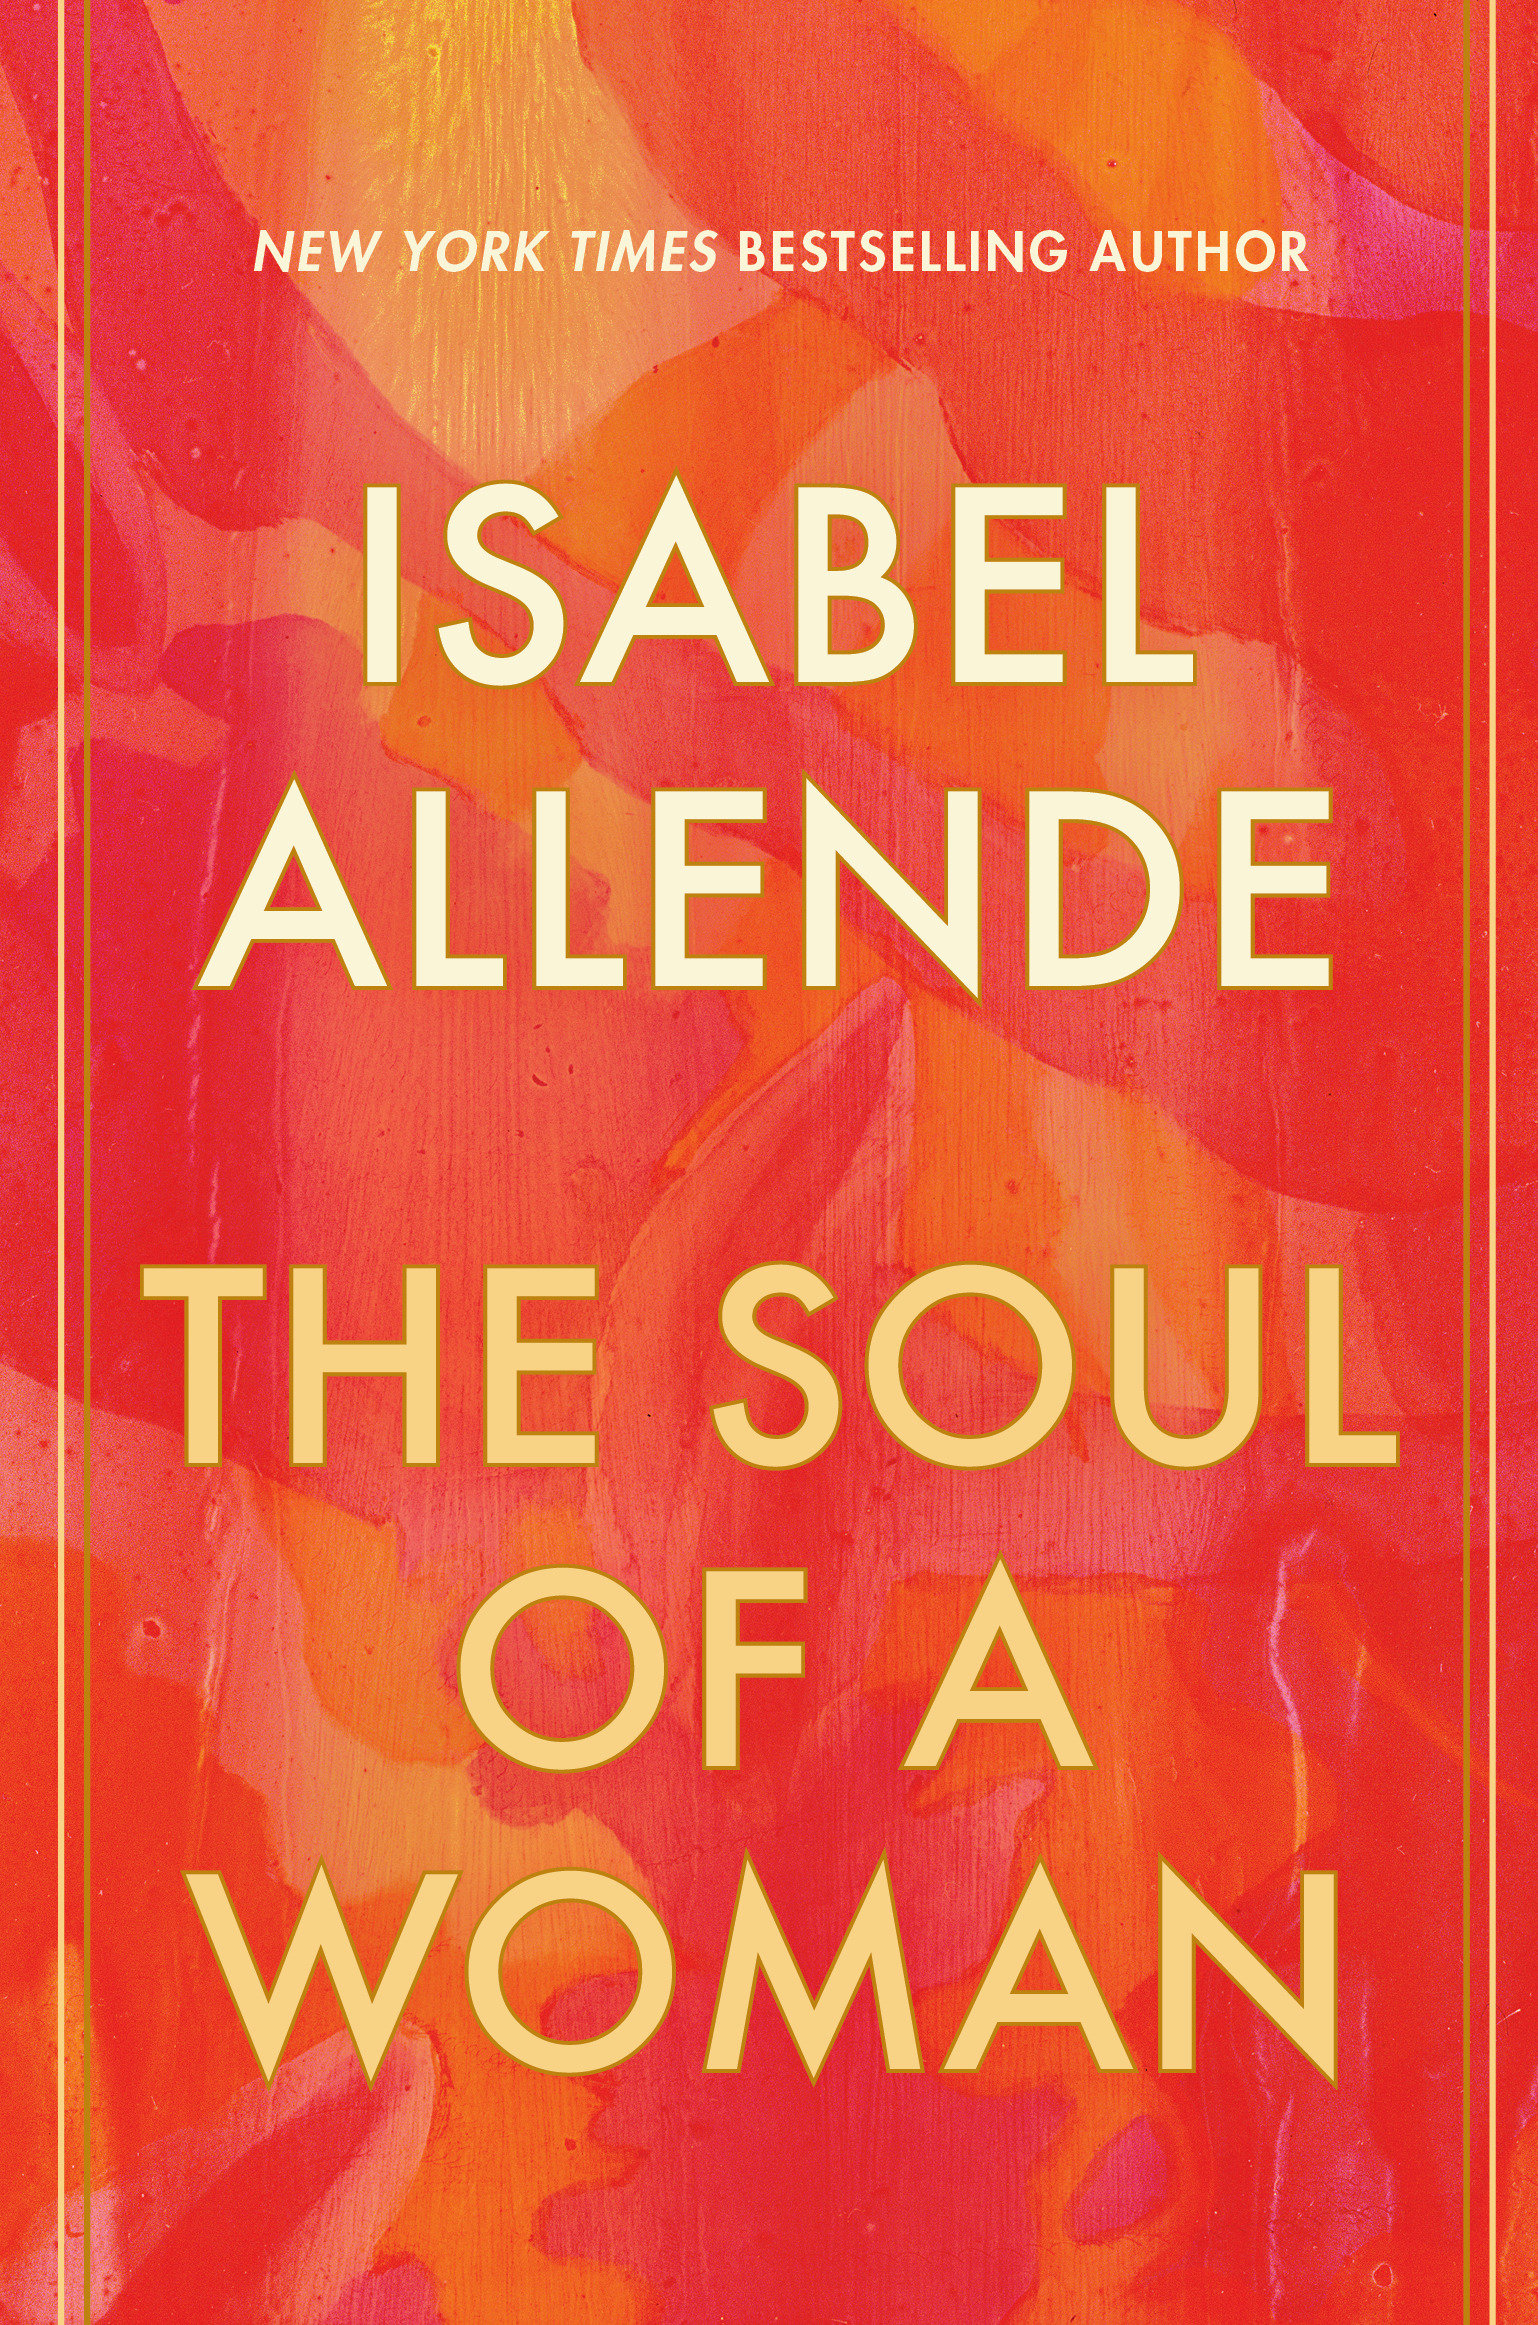 The Soul Of A Woman (Hardcover Book)